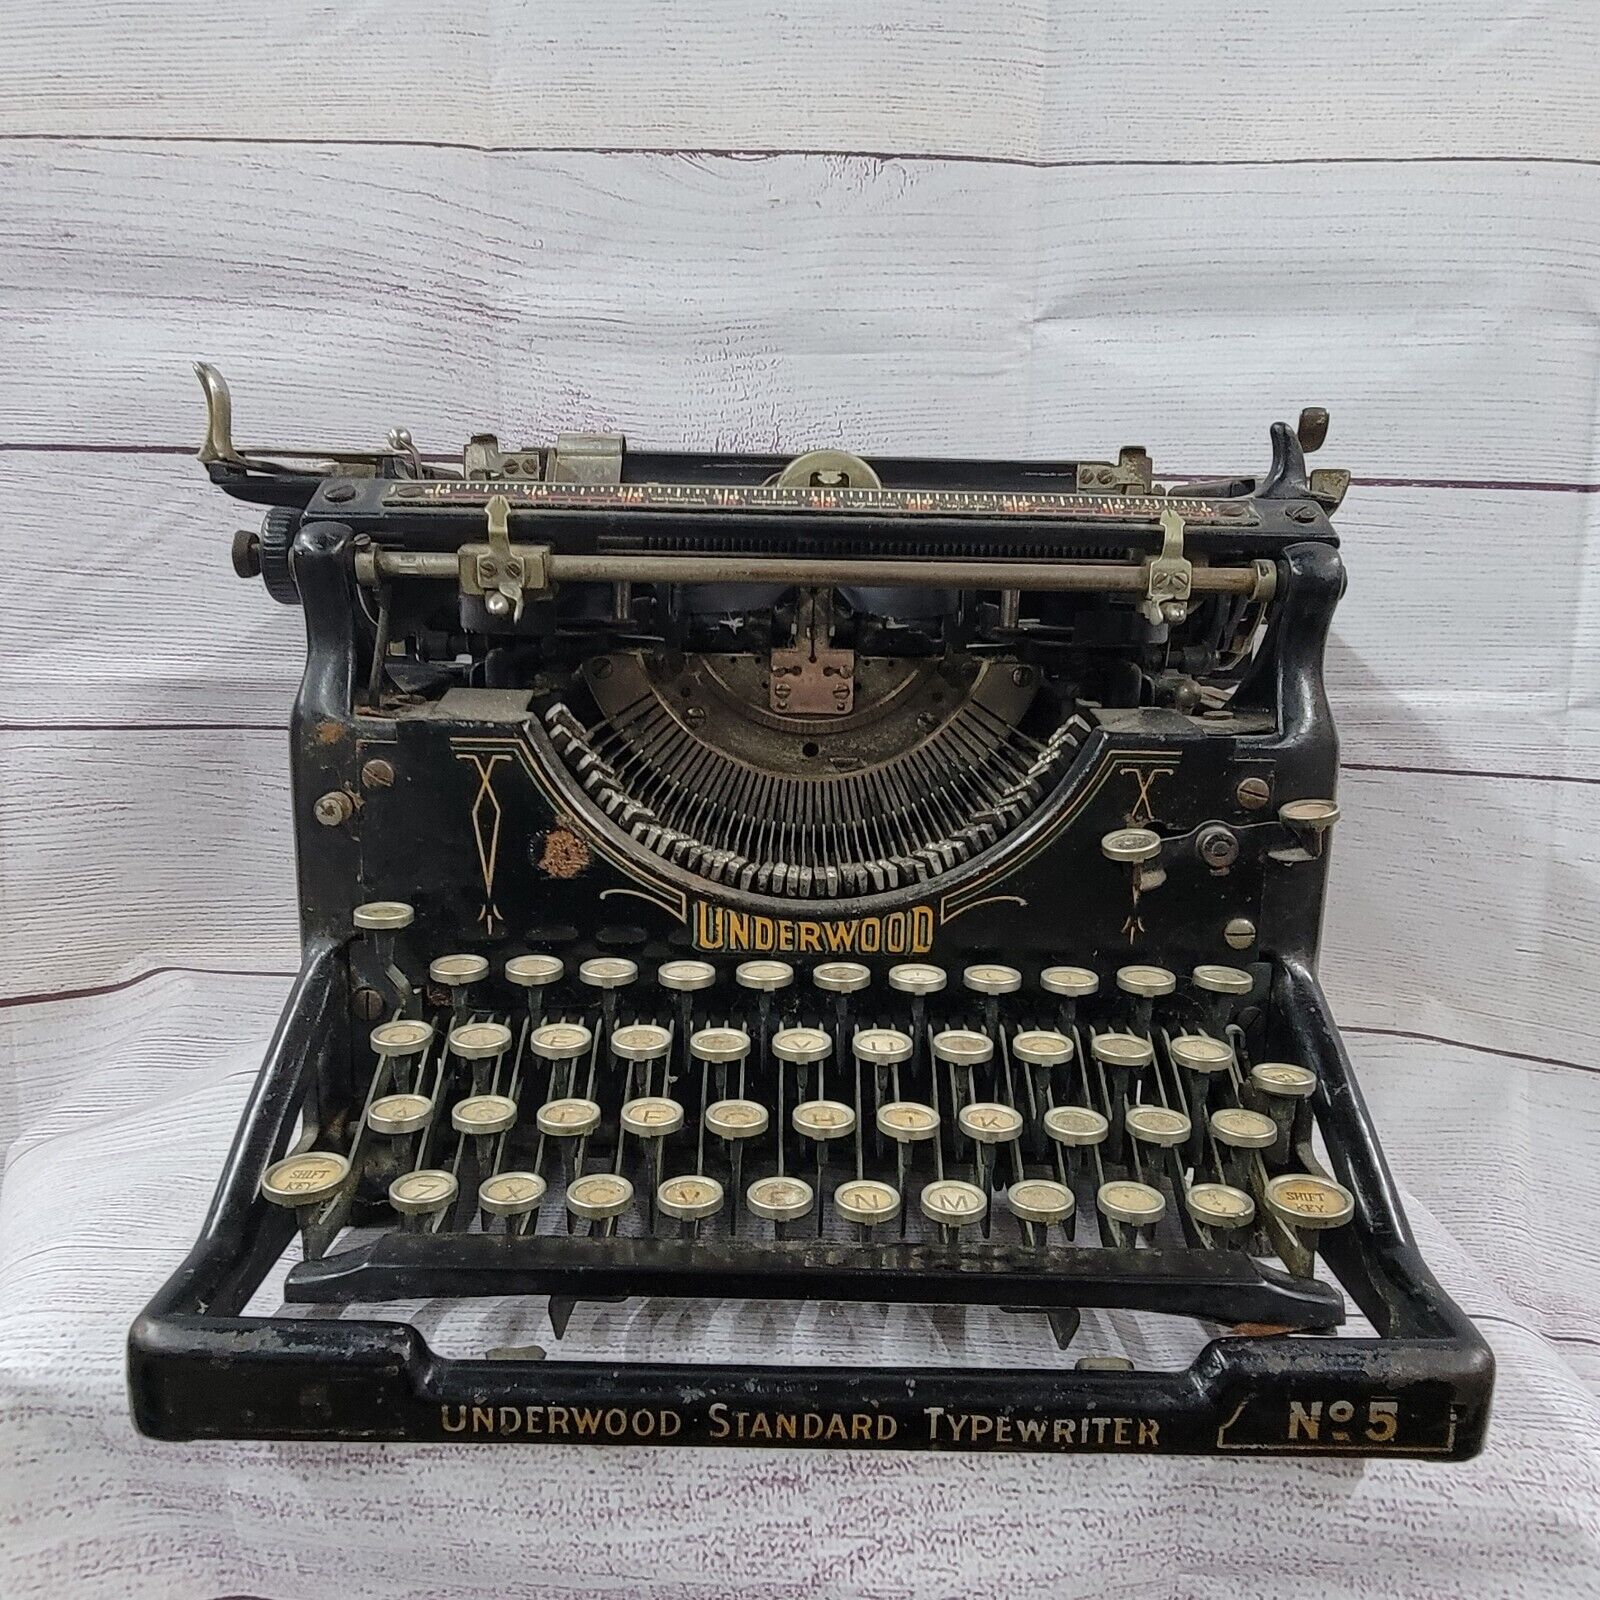 Vintage early 1900s underwood No.5 standard typewriter (non-operational)